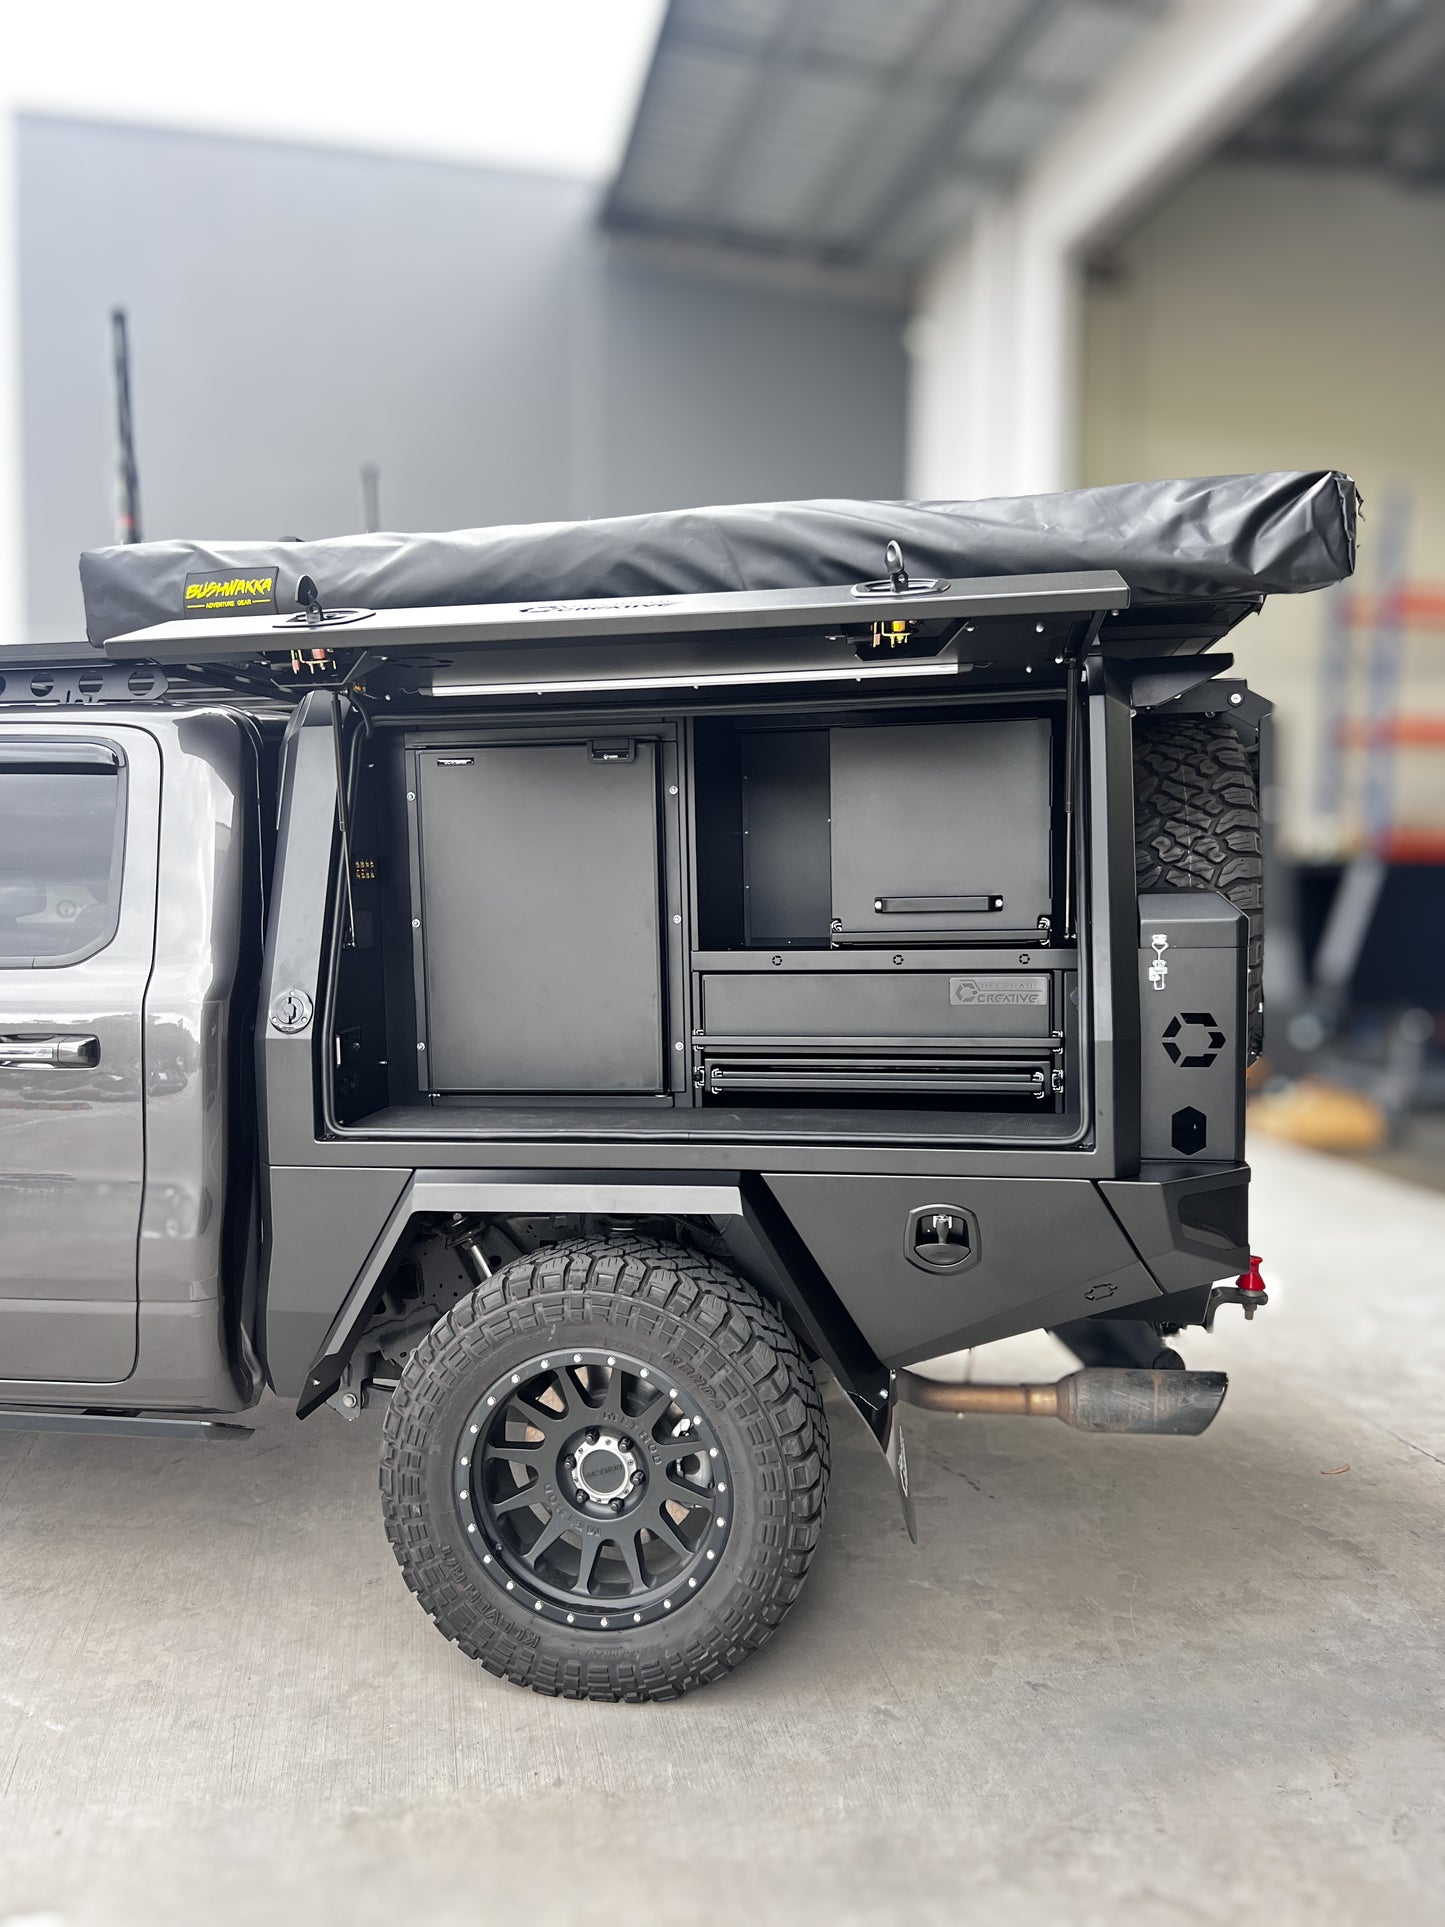 Offroad Creative 1500 Canopy Design (1500/F150 models only)